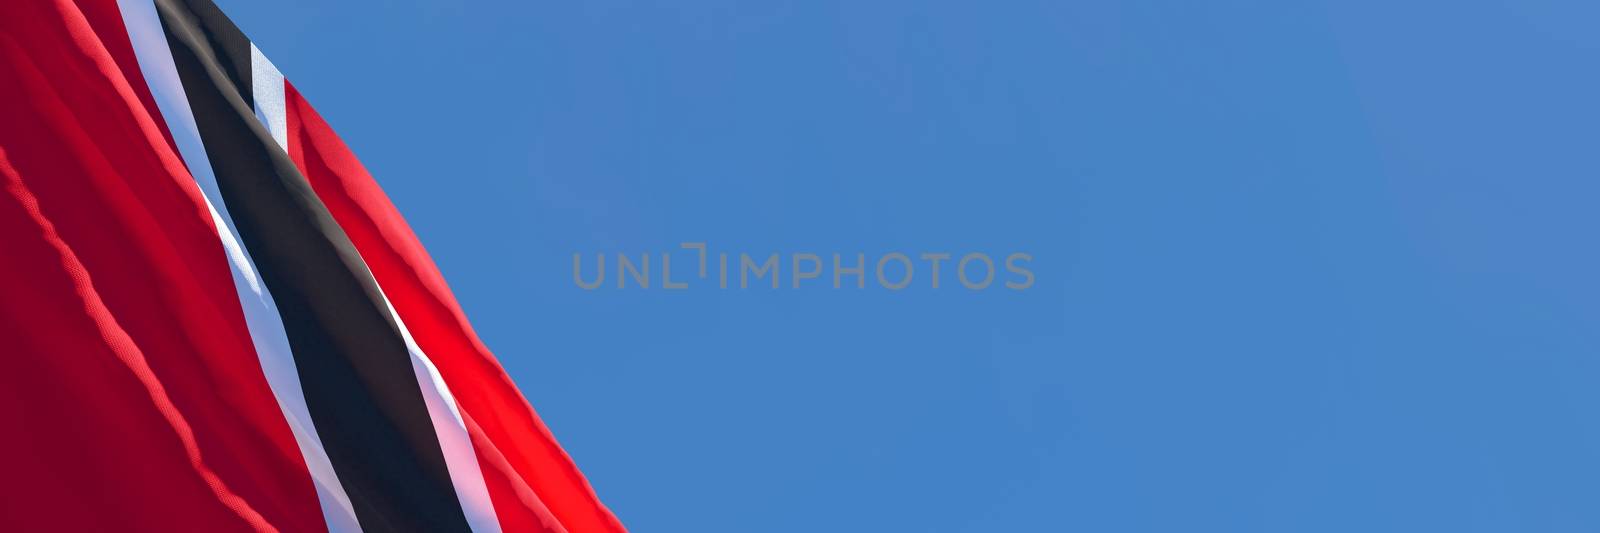 3D rendering of the national flag of Trinidad and Tobago waving in the wind against a blue sky